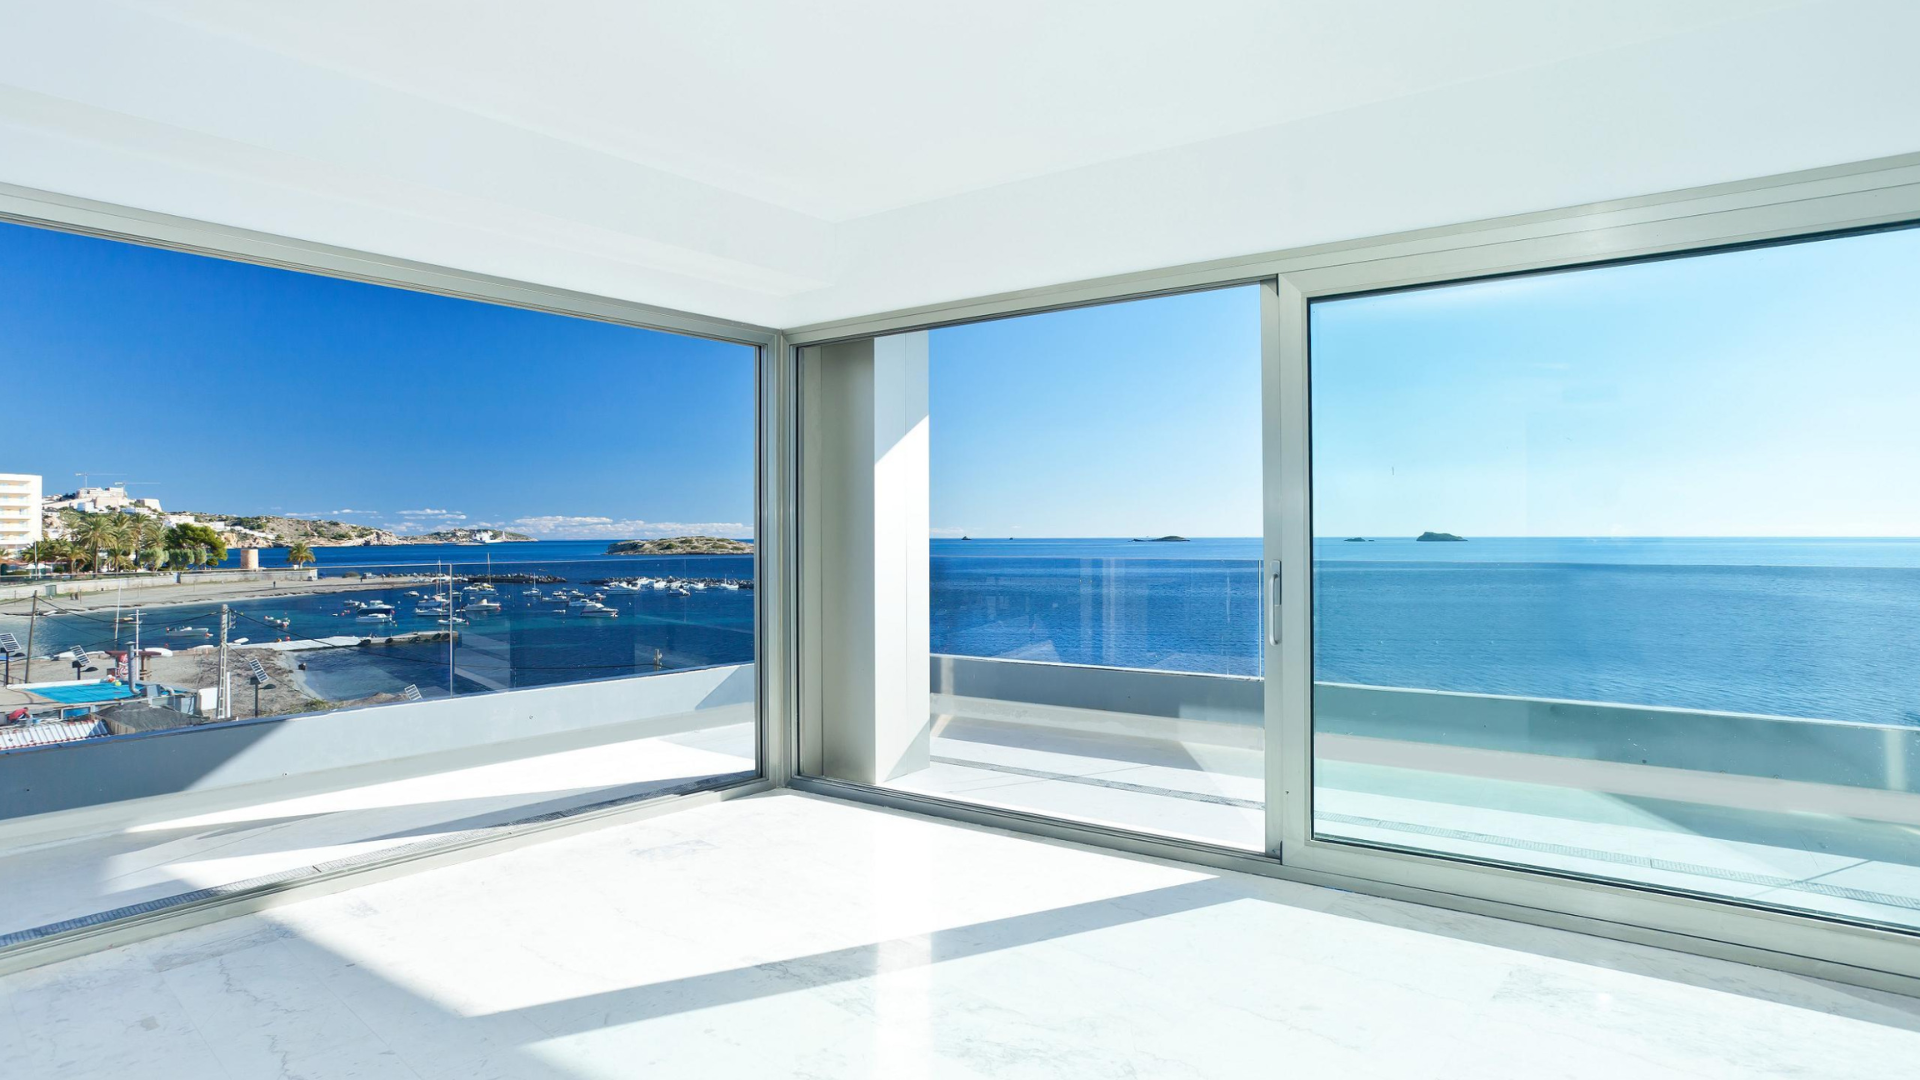 The Perfect Pitch: Finding the Ideal Acoustic Window for Your Needs